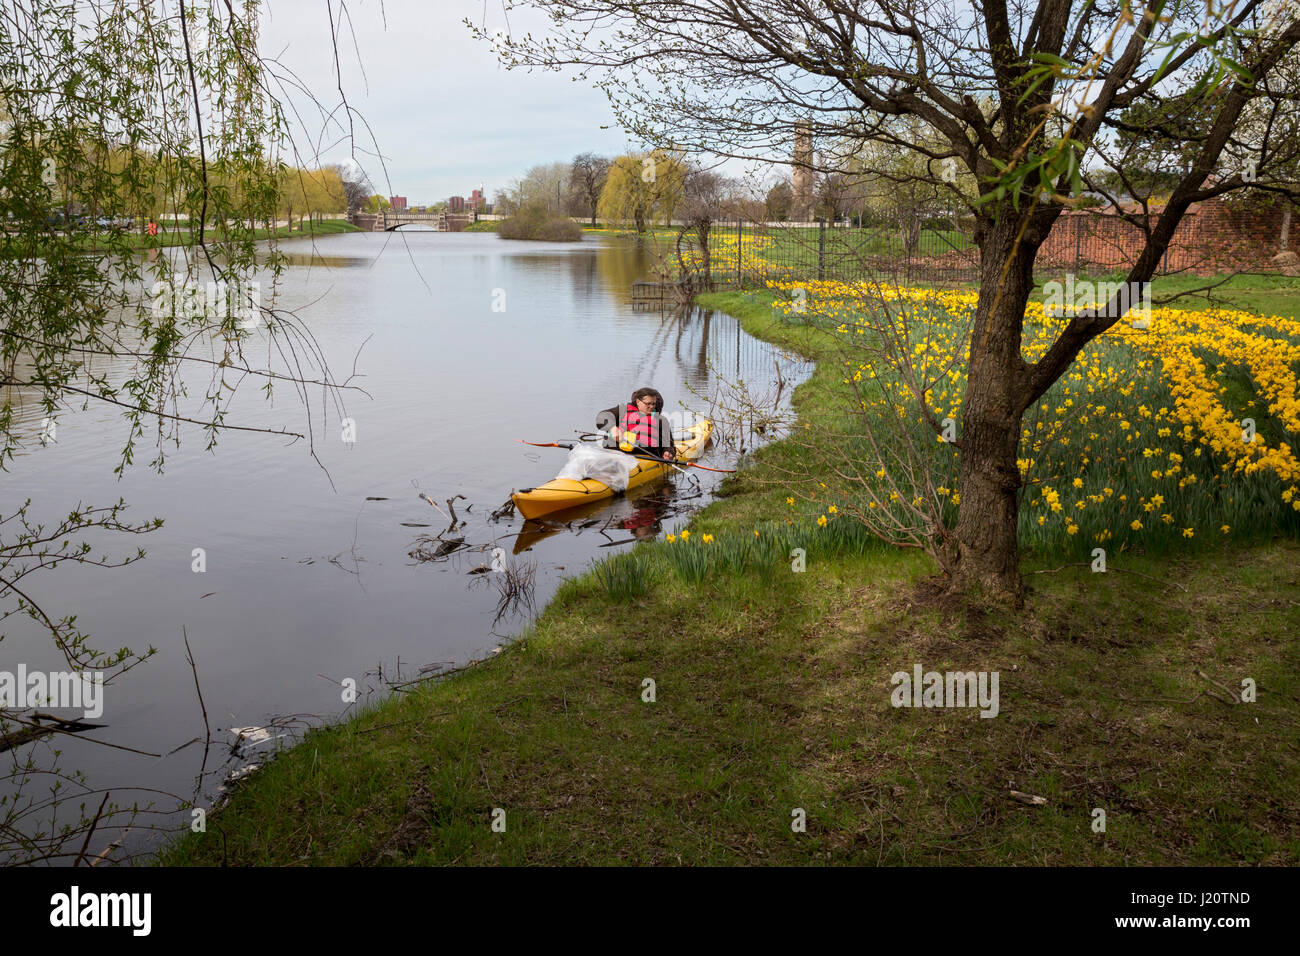 Detroit, Michigan - A volunteer in a kayak picks up trash during a spring cleanup of Belle Isle, a state park on an island in the Detroit River. Stock Photo